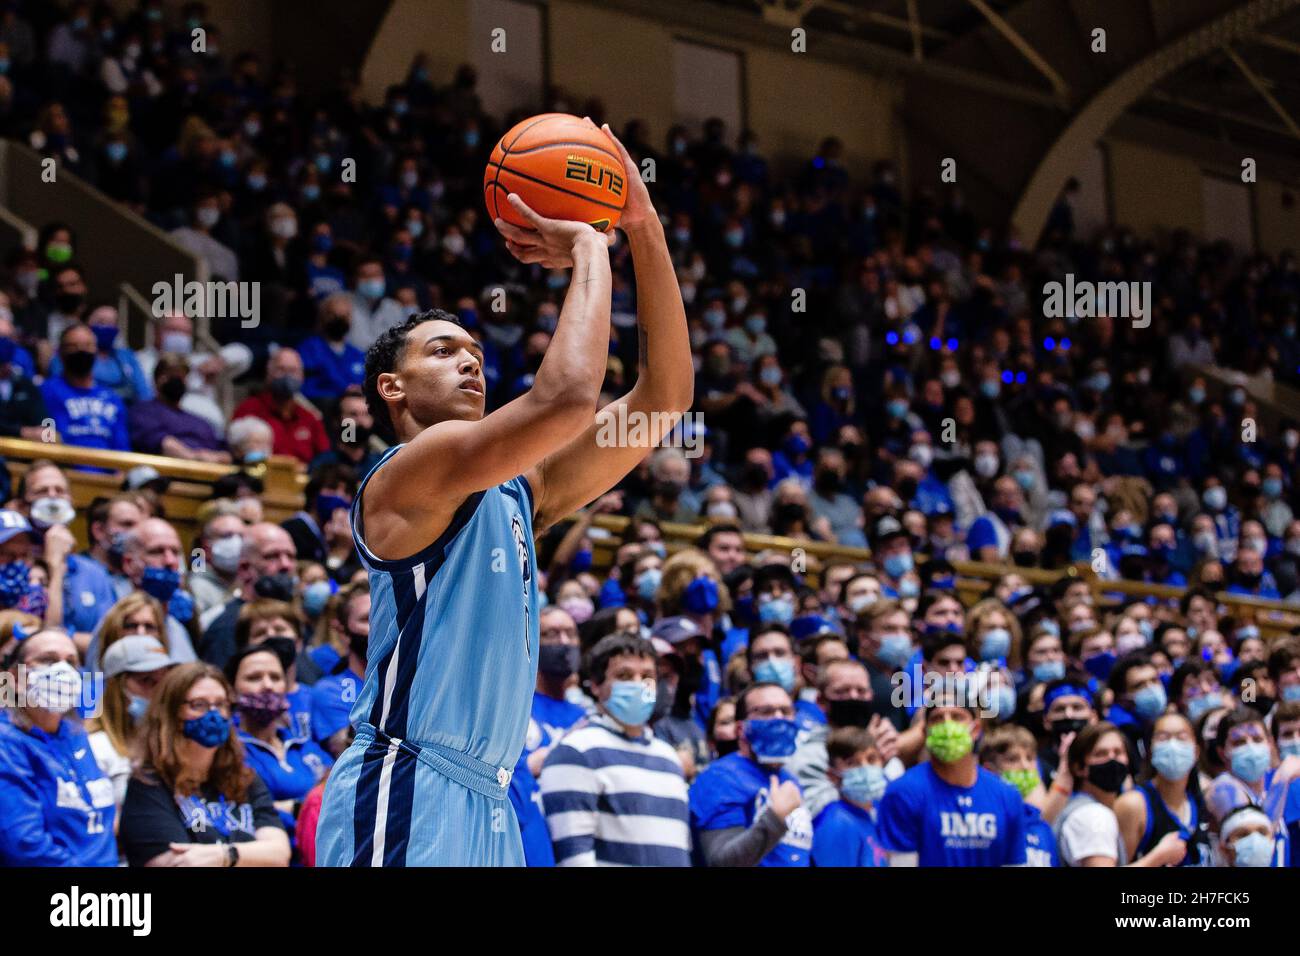 Durham, NC, USA. 22nd Nov, 2021. Citadel Bulldogs forward Jackson Price (0) shoots a three against the Duke Blue Devils during the first half of the NCAA basketball matchup at Cameron Indoor in Durham, NC. (Scott Kinser/Cal Sport Media). Credit: csm/Alamy Live News Stock Photo